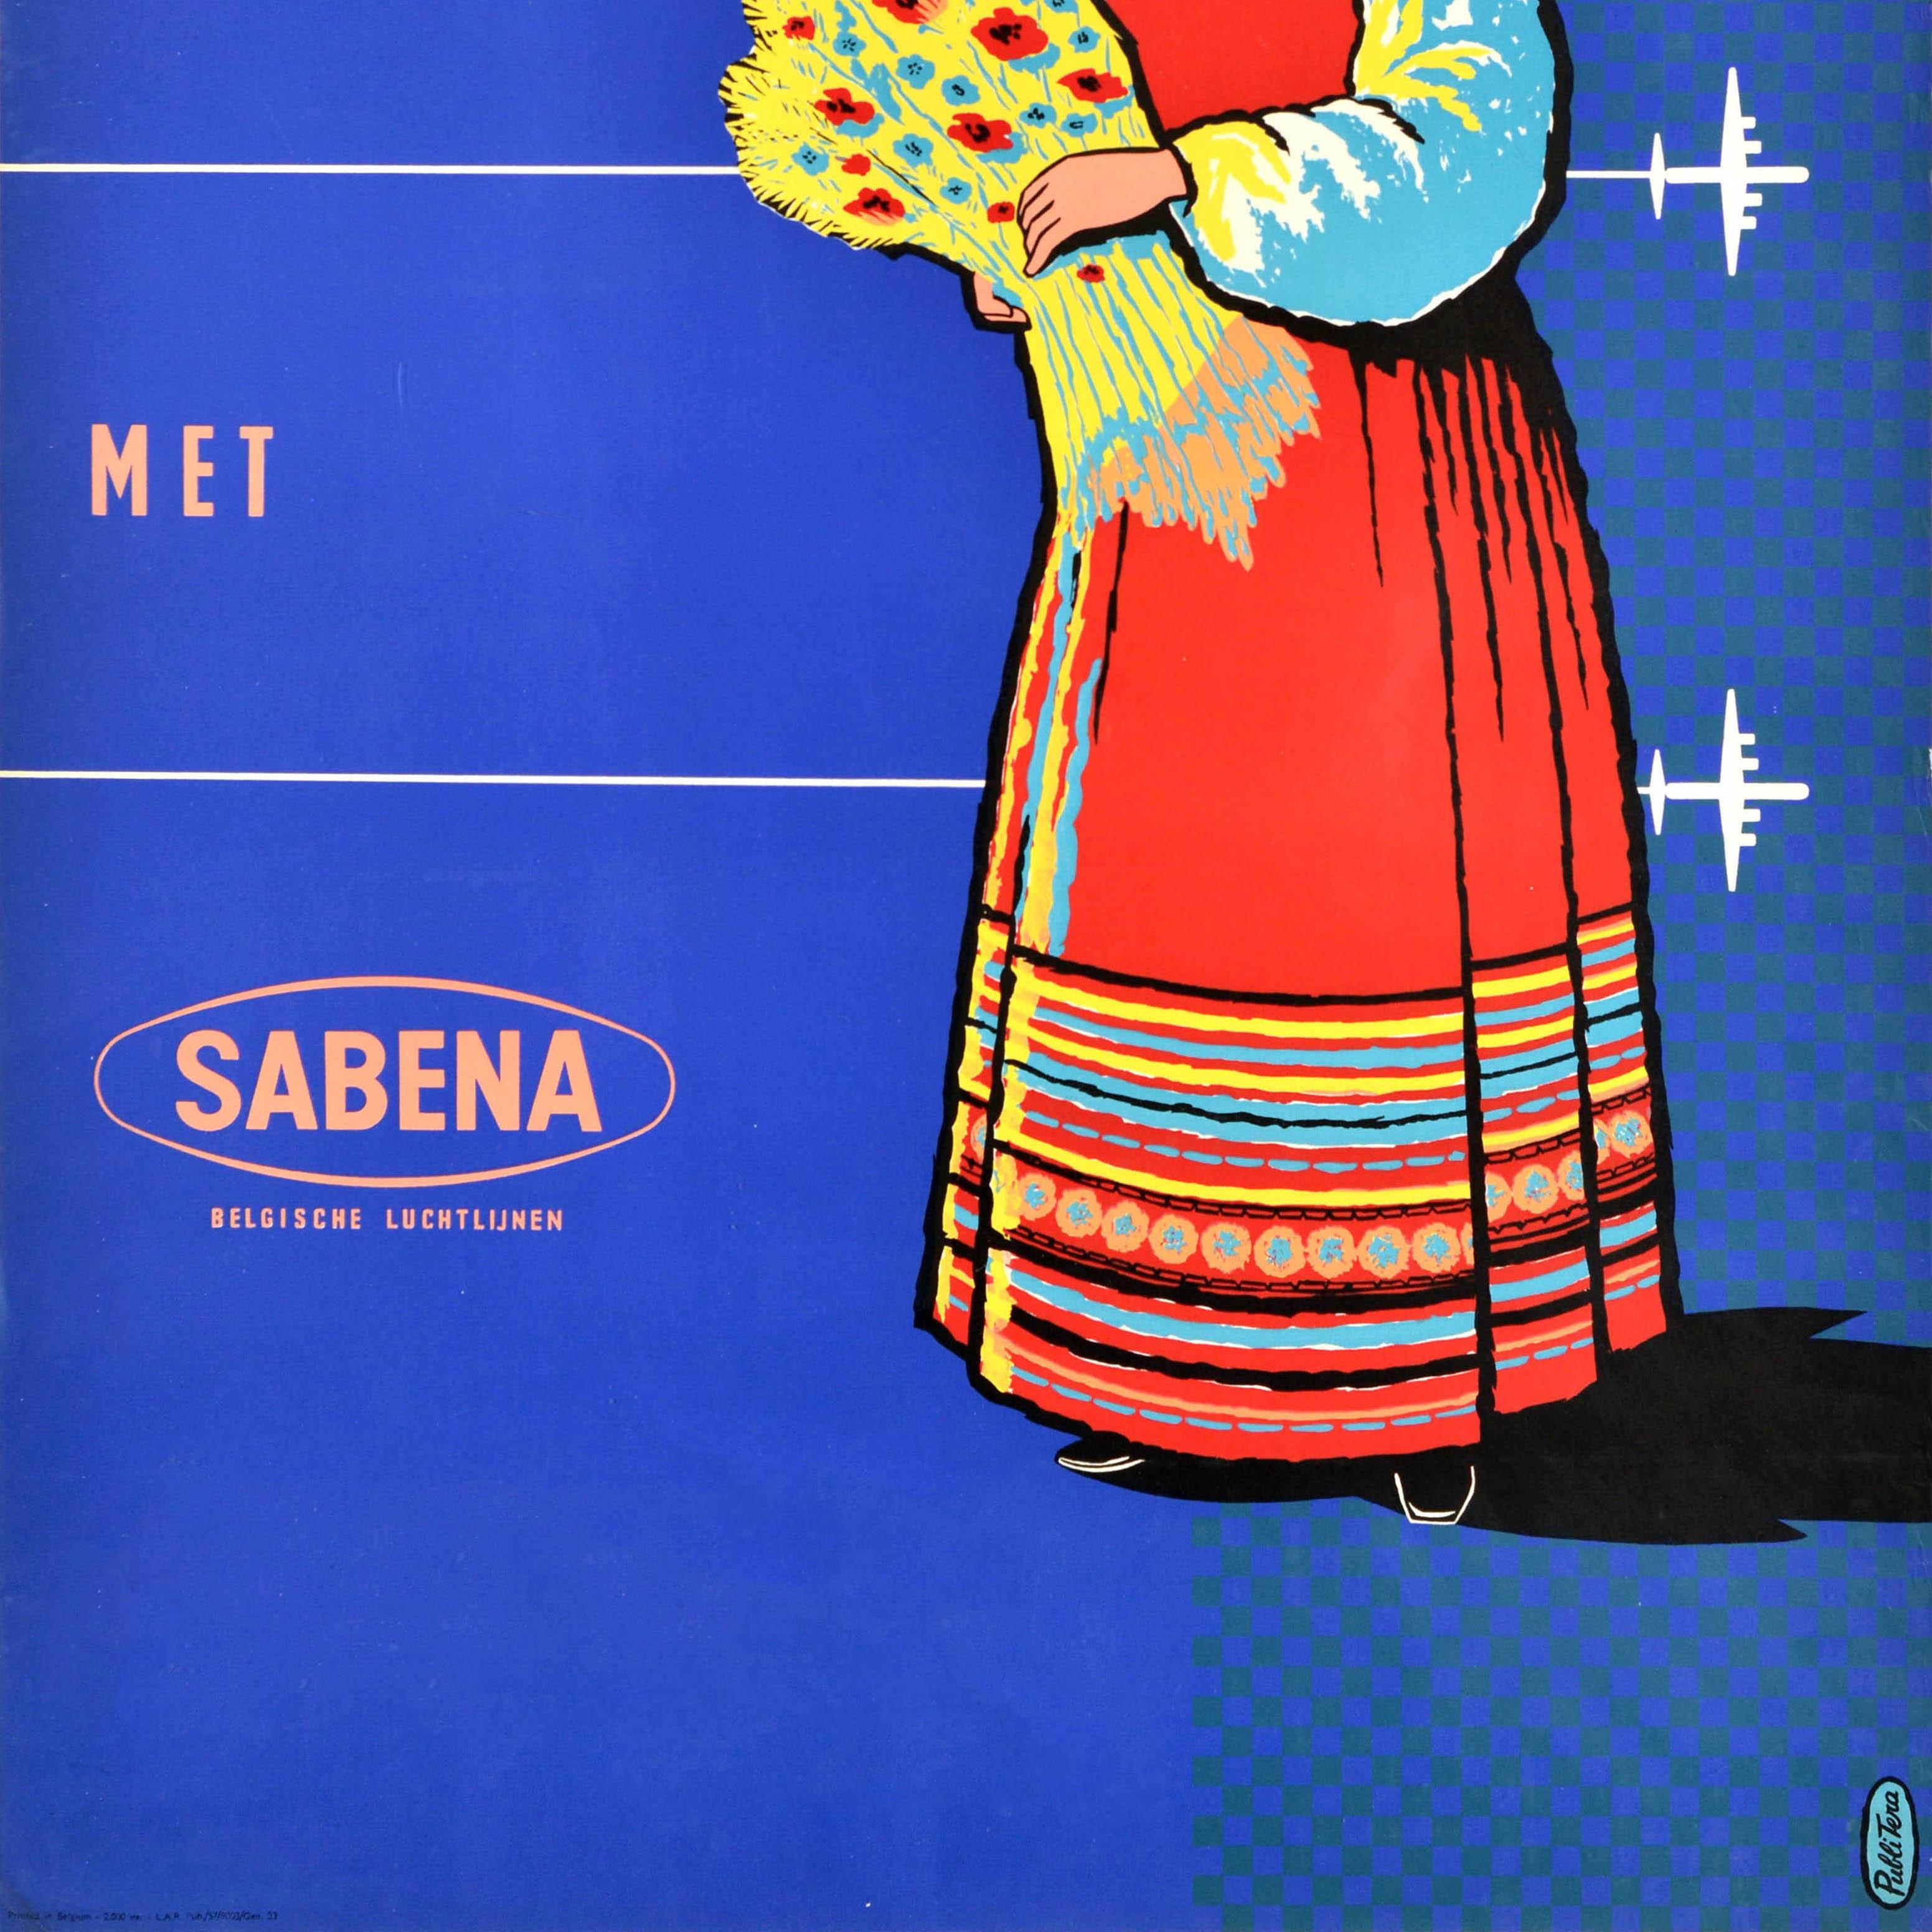 Original Vintage Travel Advertising Poster Russia Sabena Airlines Belgium USSR In Good Condition For Sale In London, GB